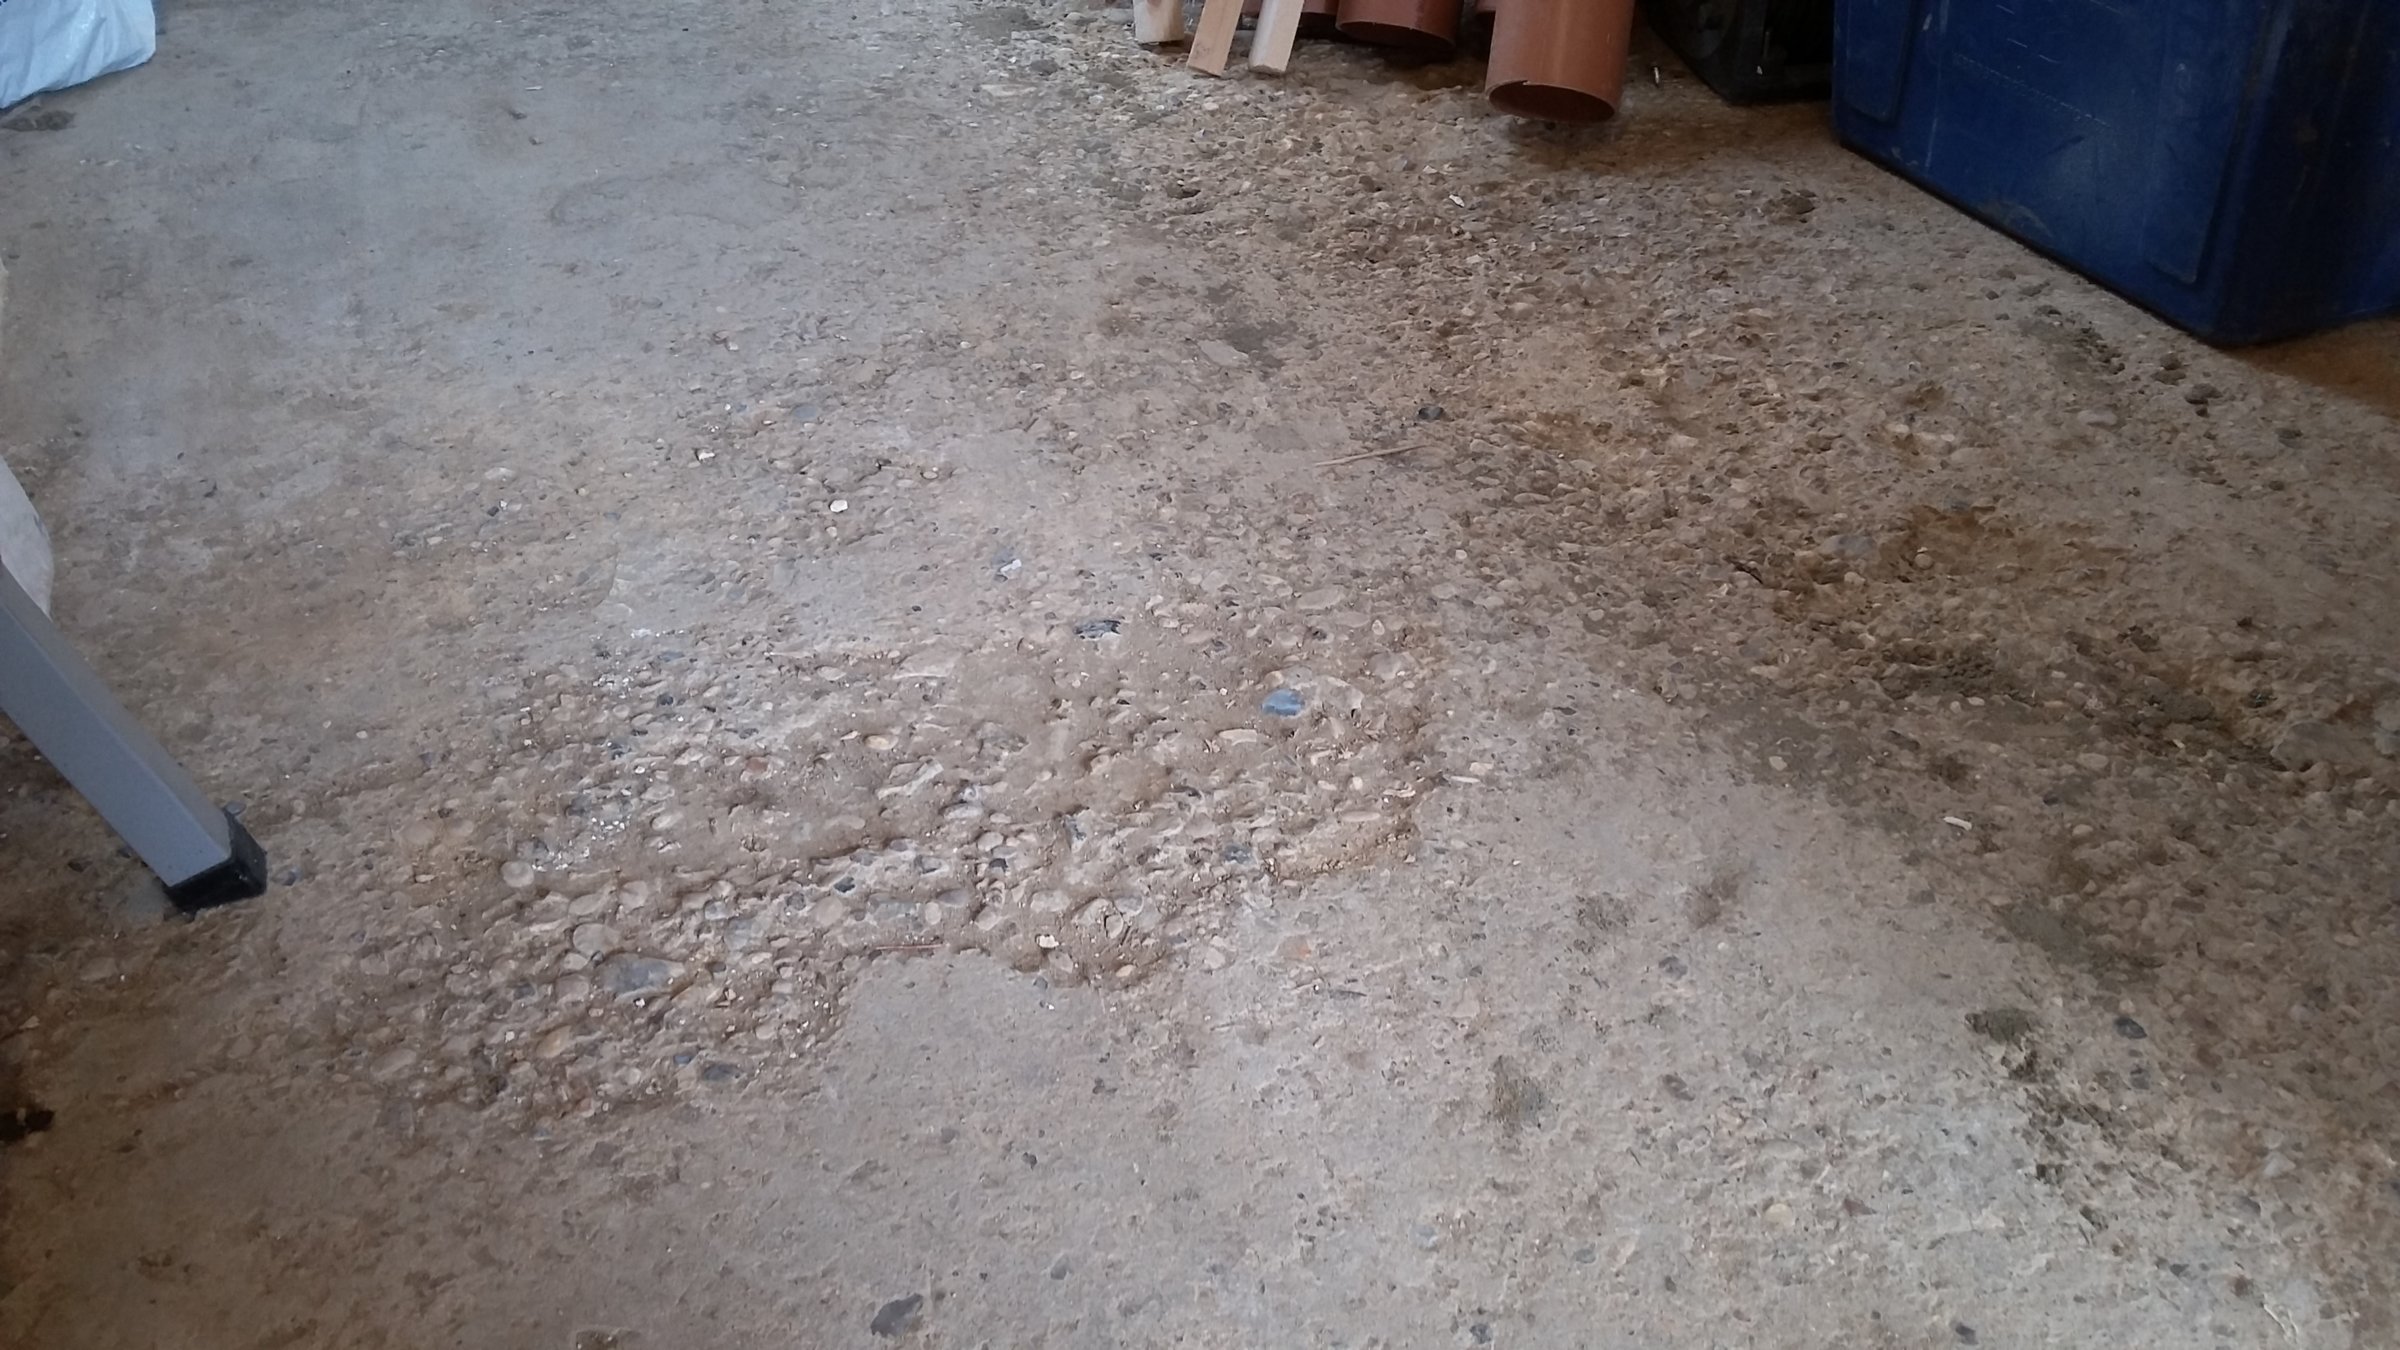 Advice for a new concrete garage floor | DIYnot Forums